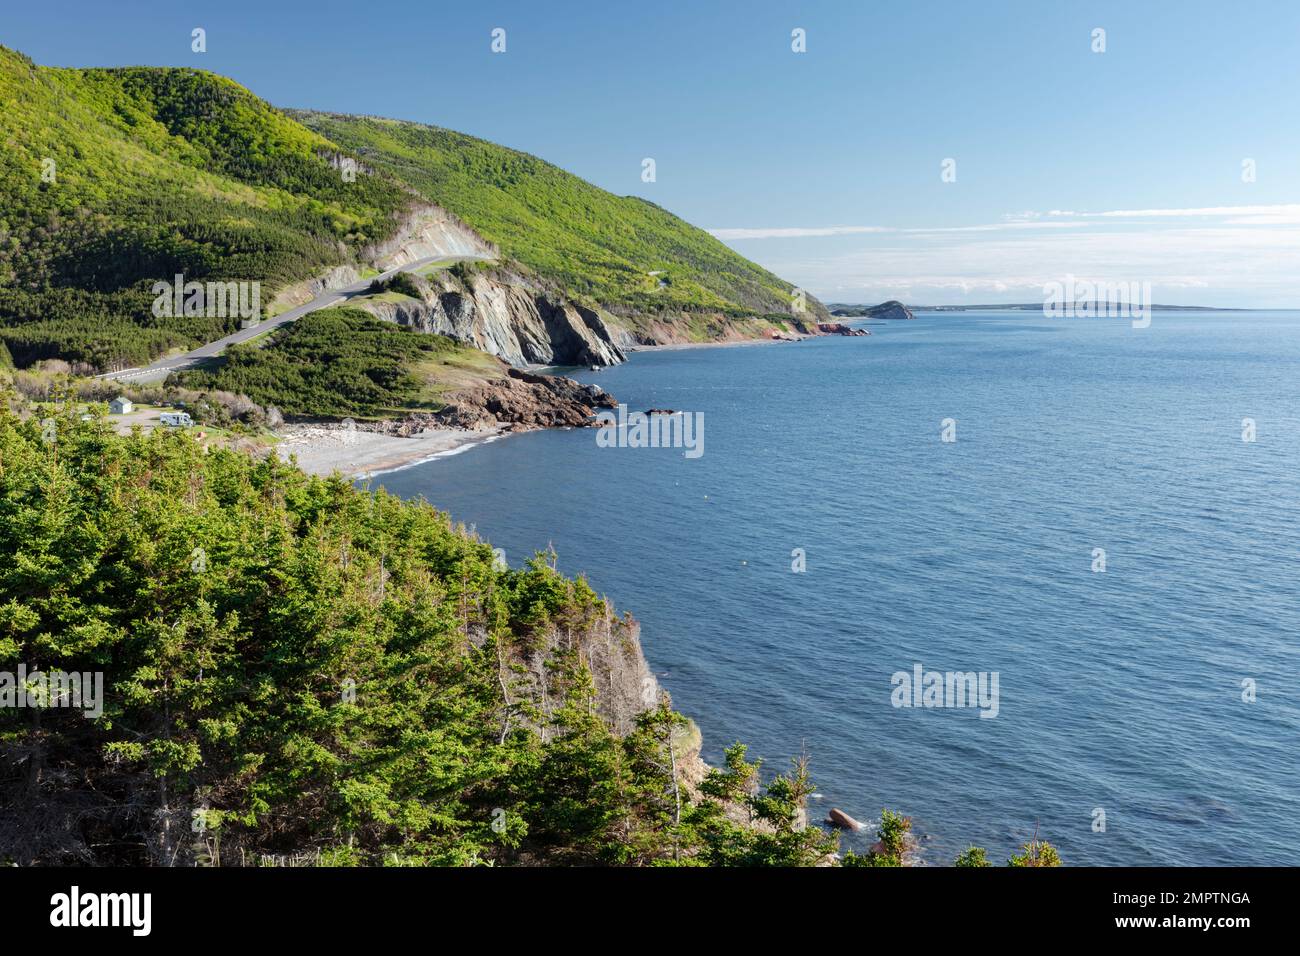 The Cabot Trail, in the Canadian Maritime province of Nova Scotia, is one of the most famous and beautiful scenic drives in the world. Stock Photo